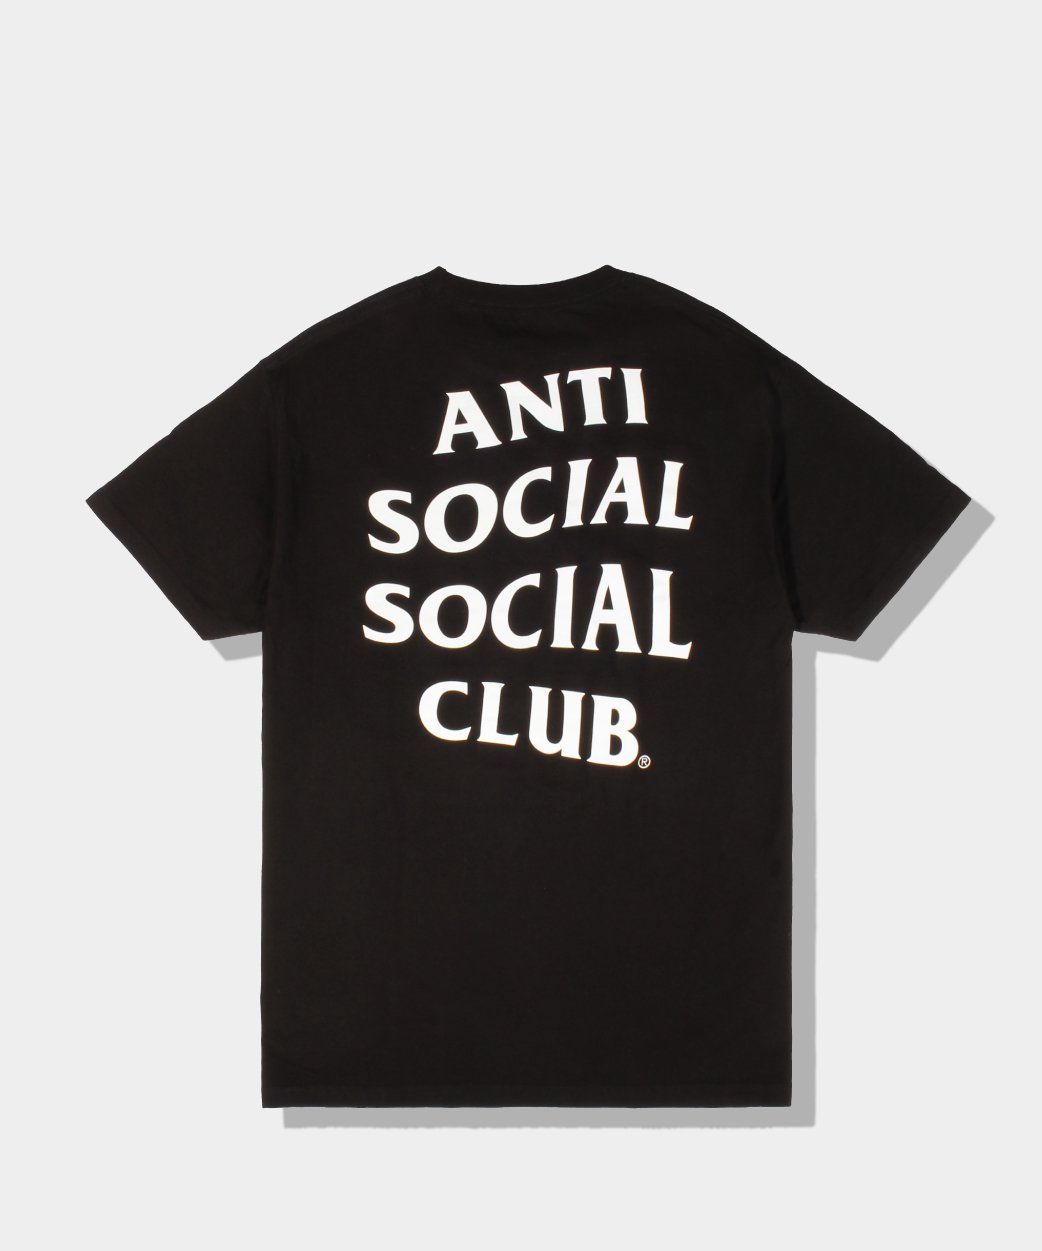 SALE 40% OFF! <br>Anti Social Social Club ASSCアンチソーシャルソーシャルクラブLogo Tee Black/Tシャツ<img class='new_mark_img2' src='https://img.shop-pro.jp/img/new/icons20.gif' style='border:none;display:inline;margin:0px;padding:0px;width:auto;' />